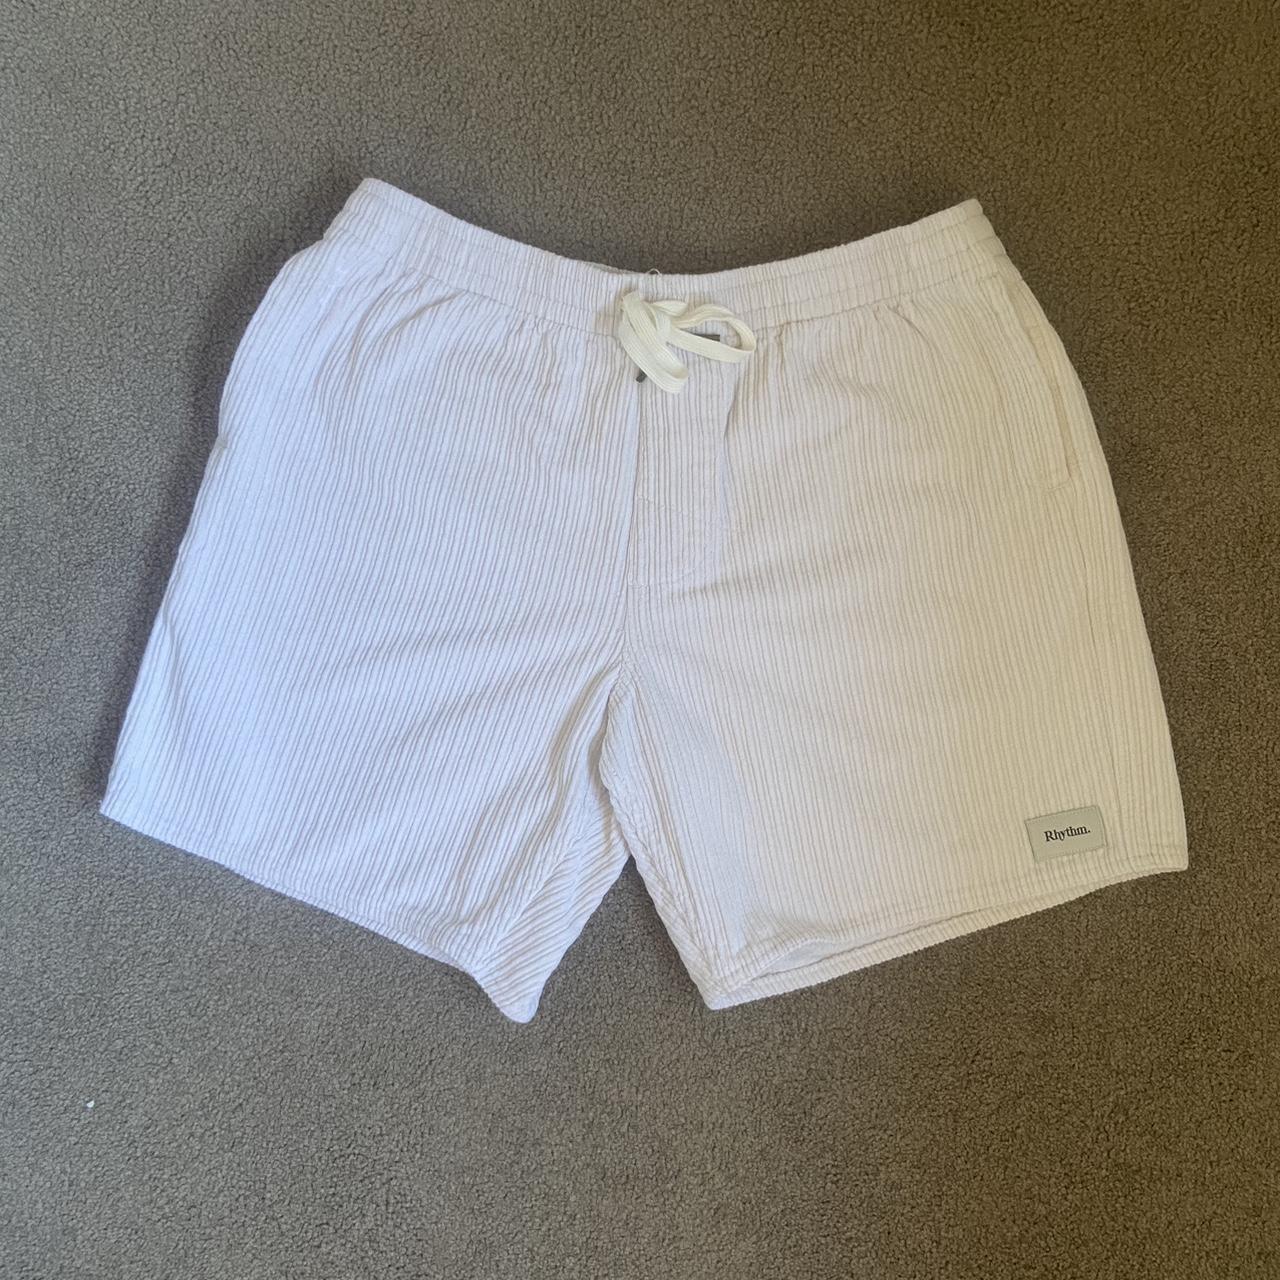 White Rhythm corduroy shorts •can fit anywhere from... - Depop